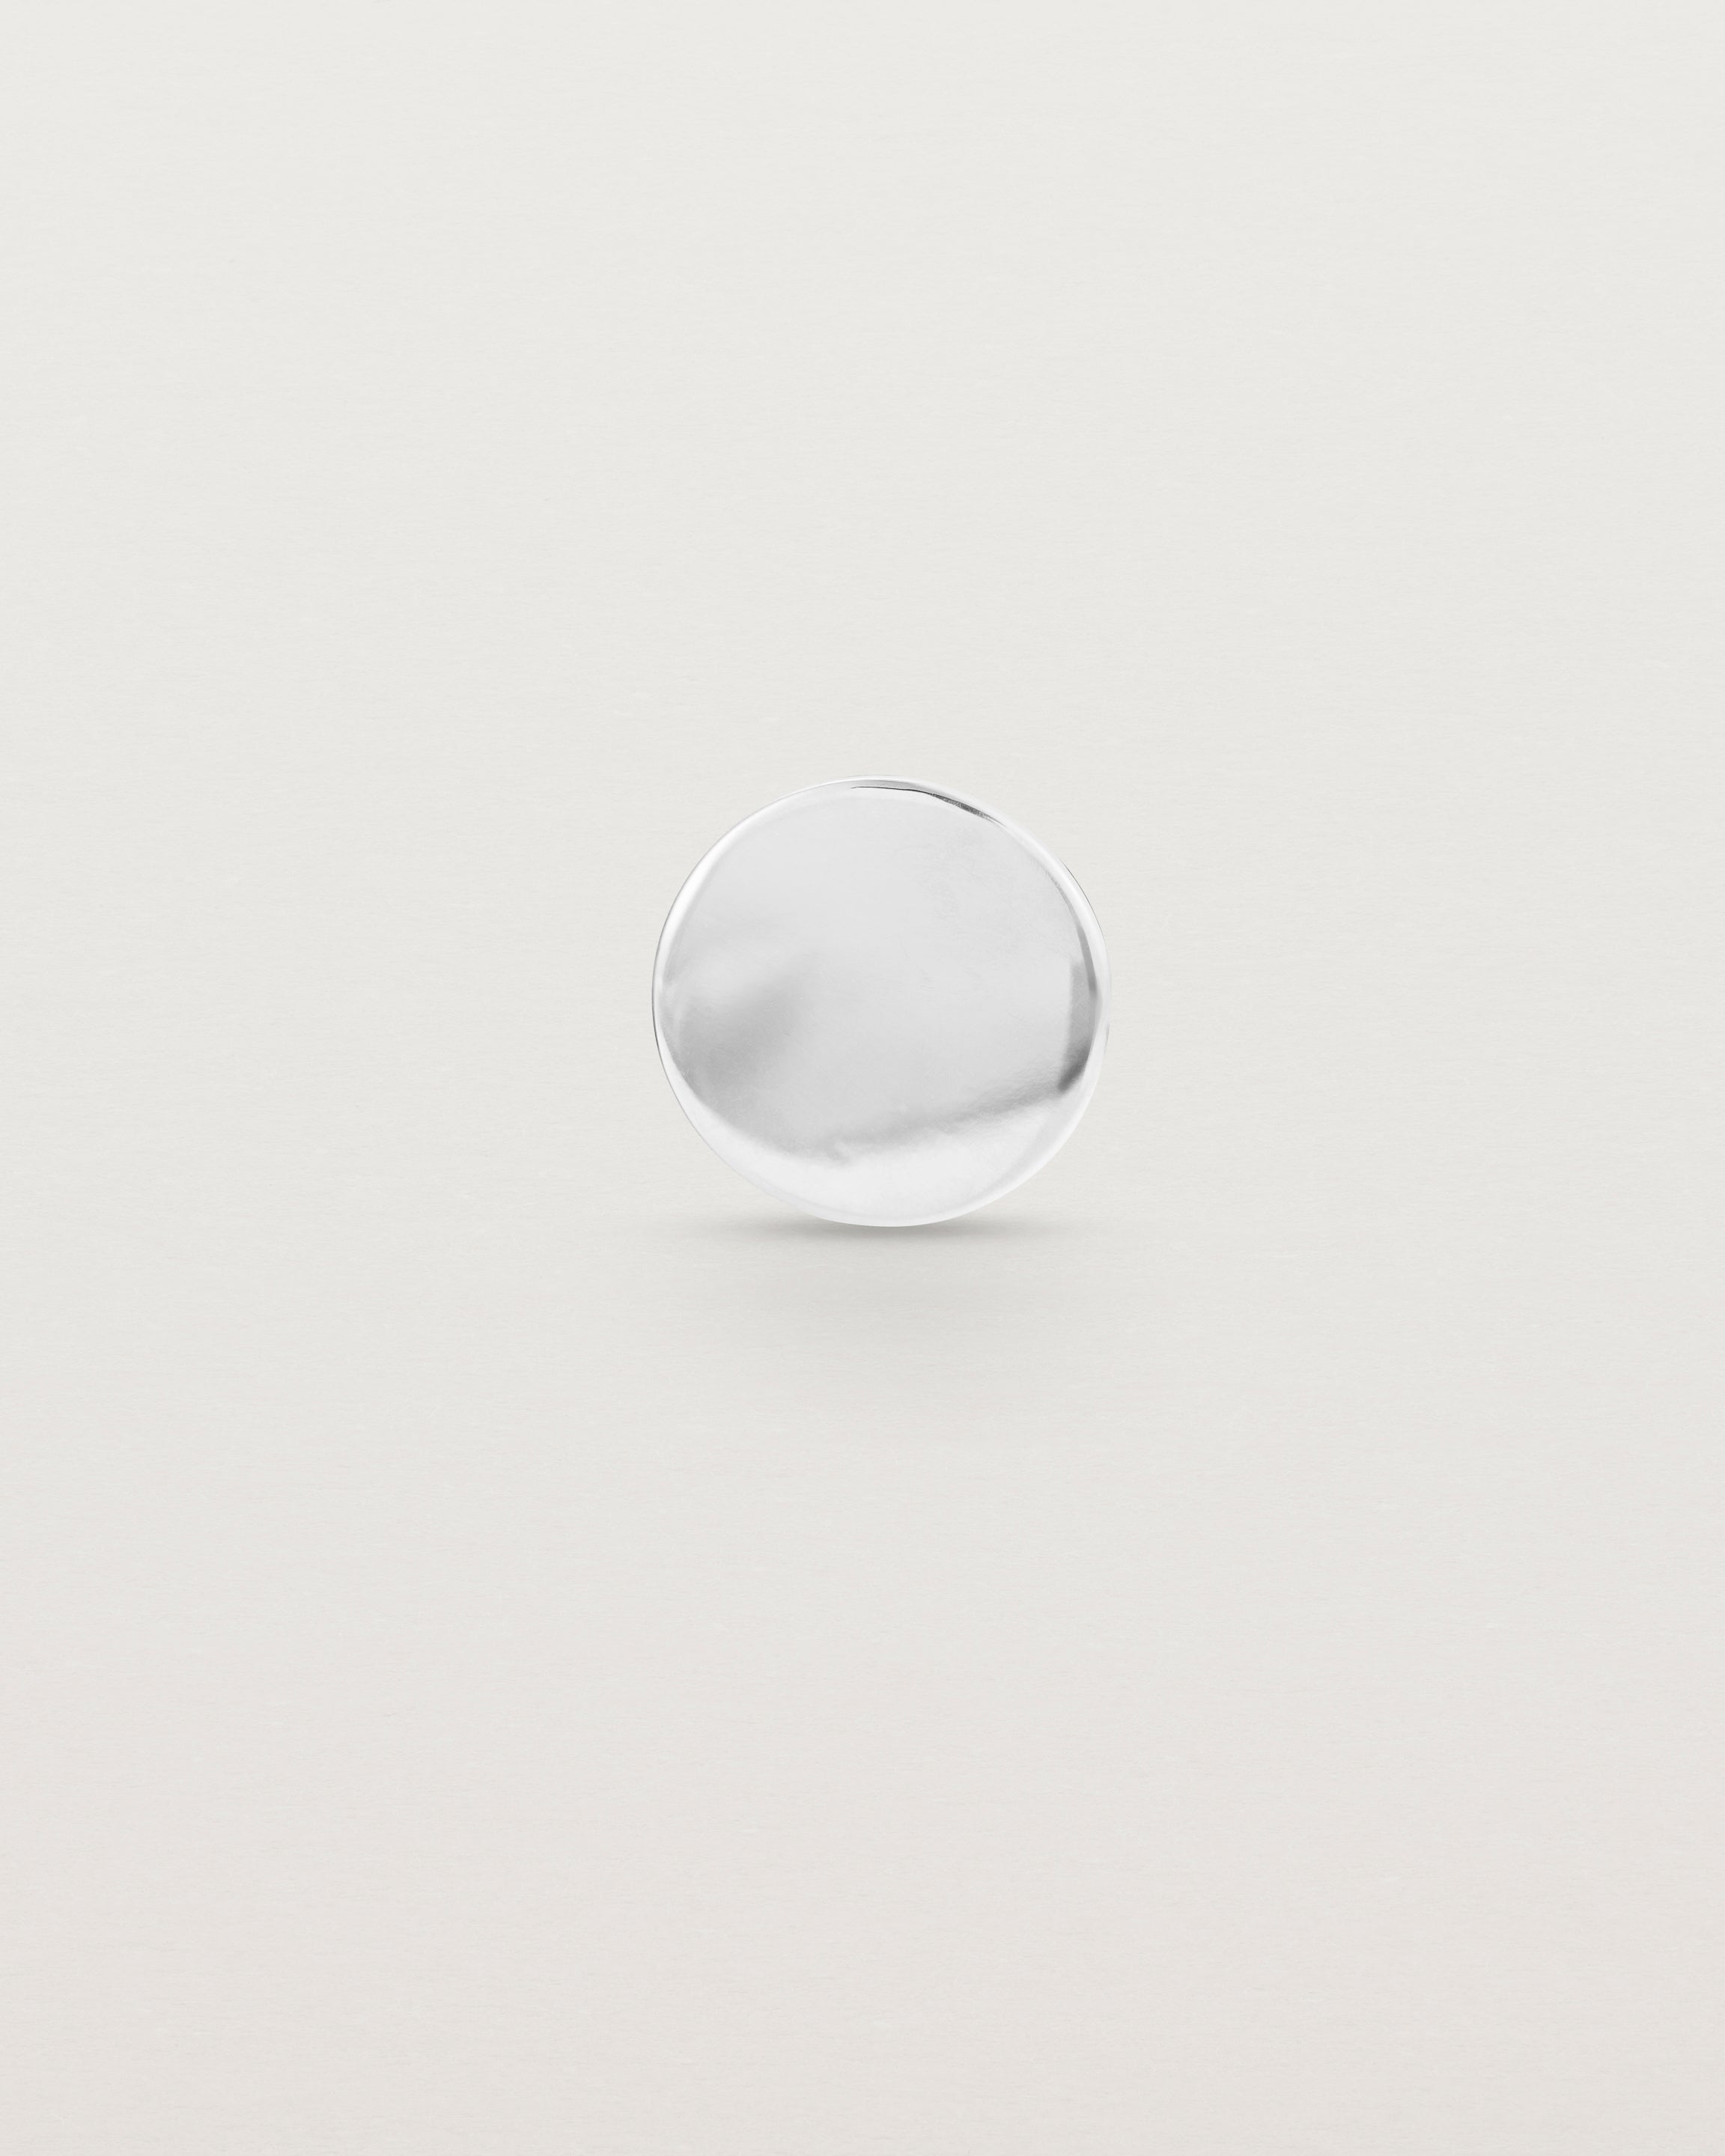 A round sterling silver lapel pin